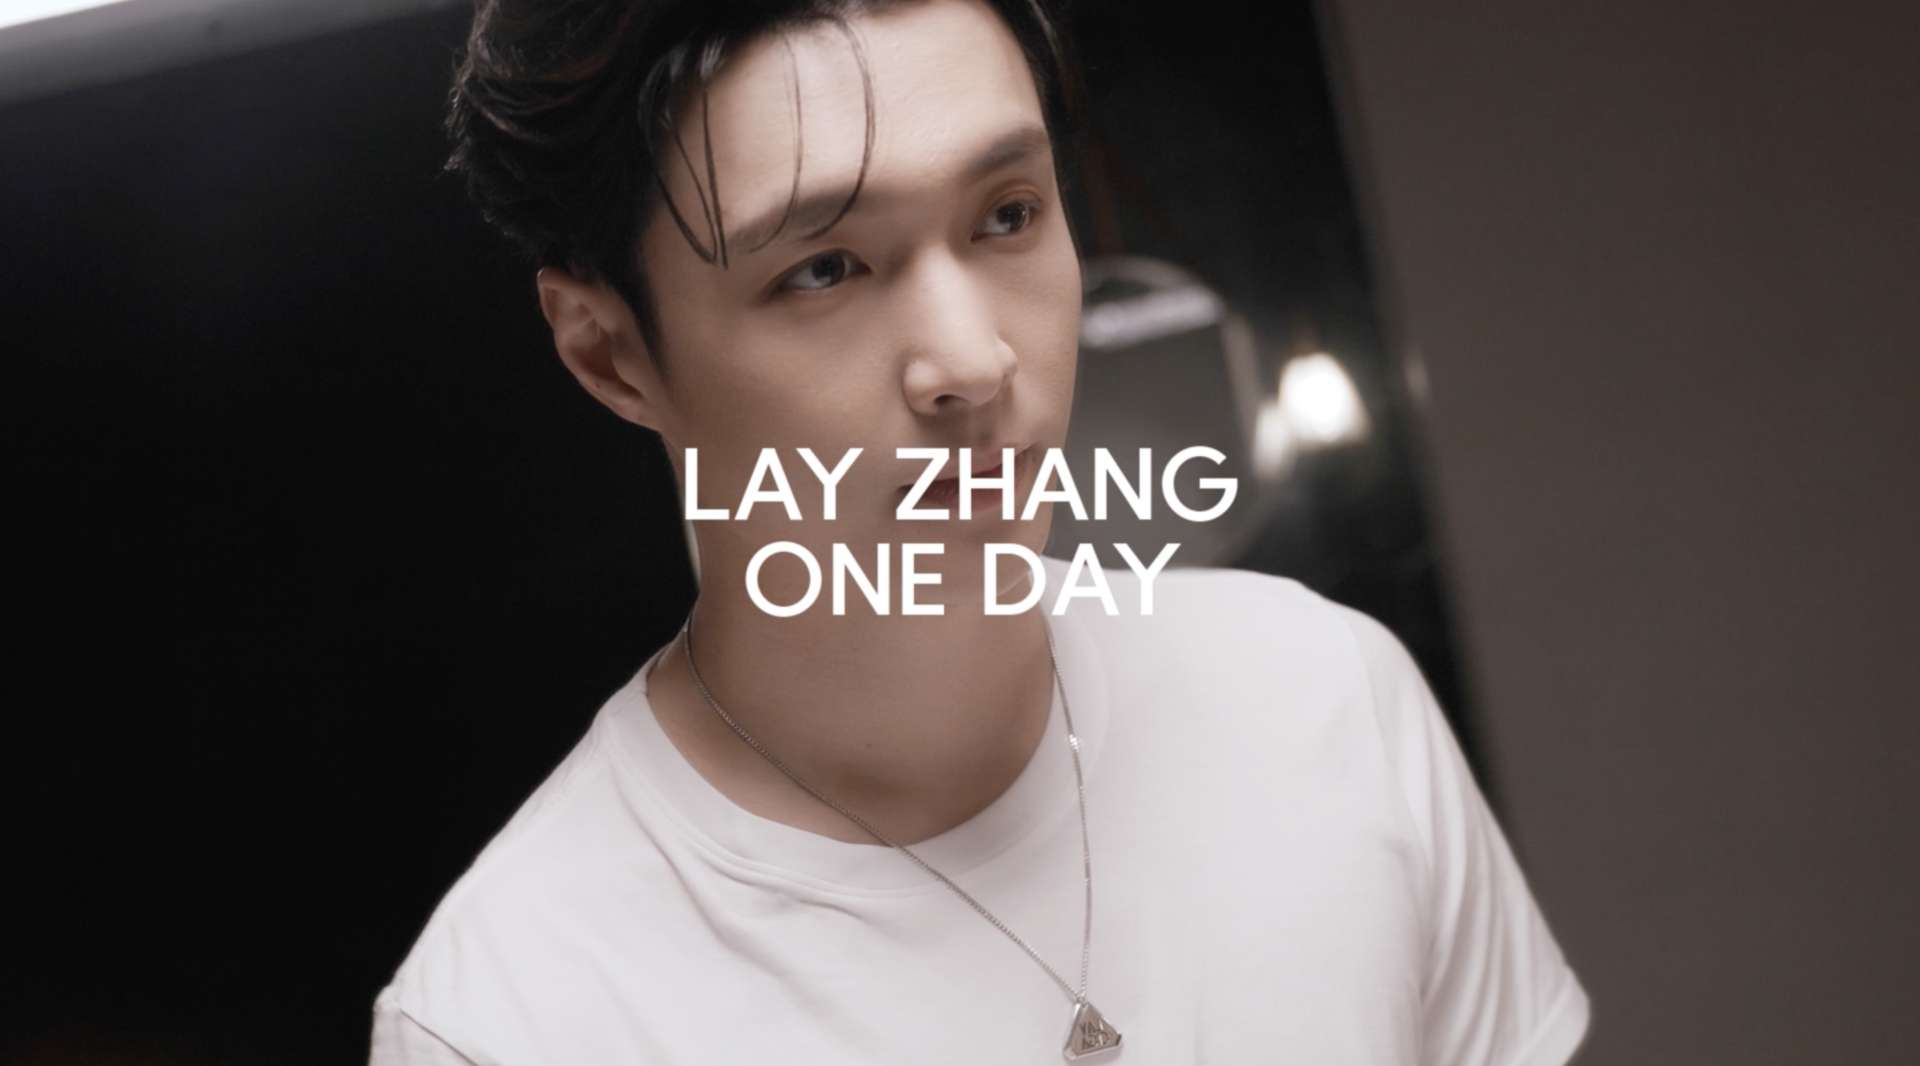 M.A.C "LAY ZHANG ONE DAY"